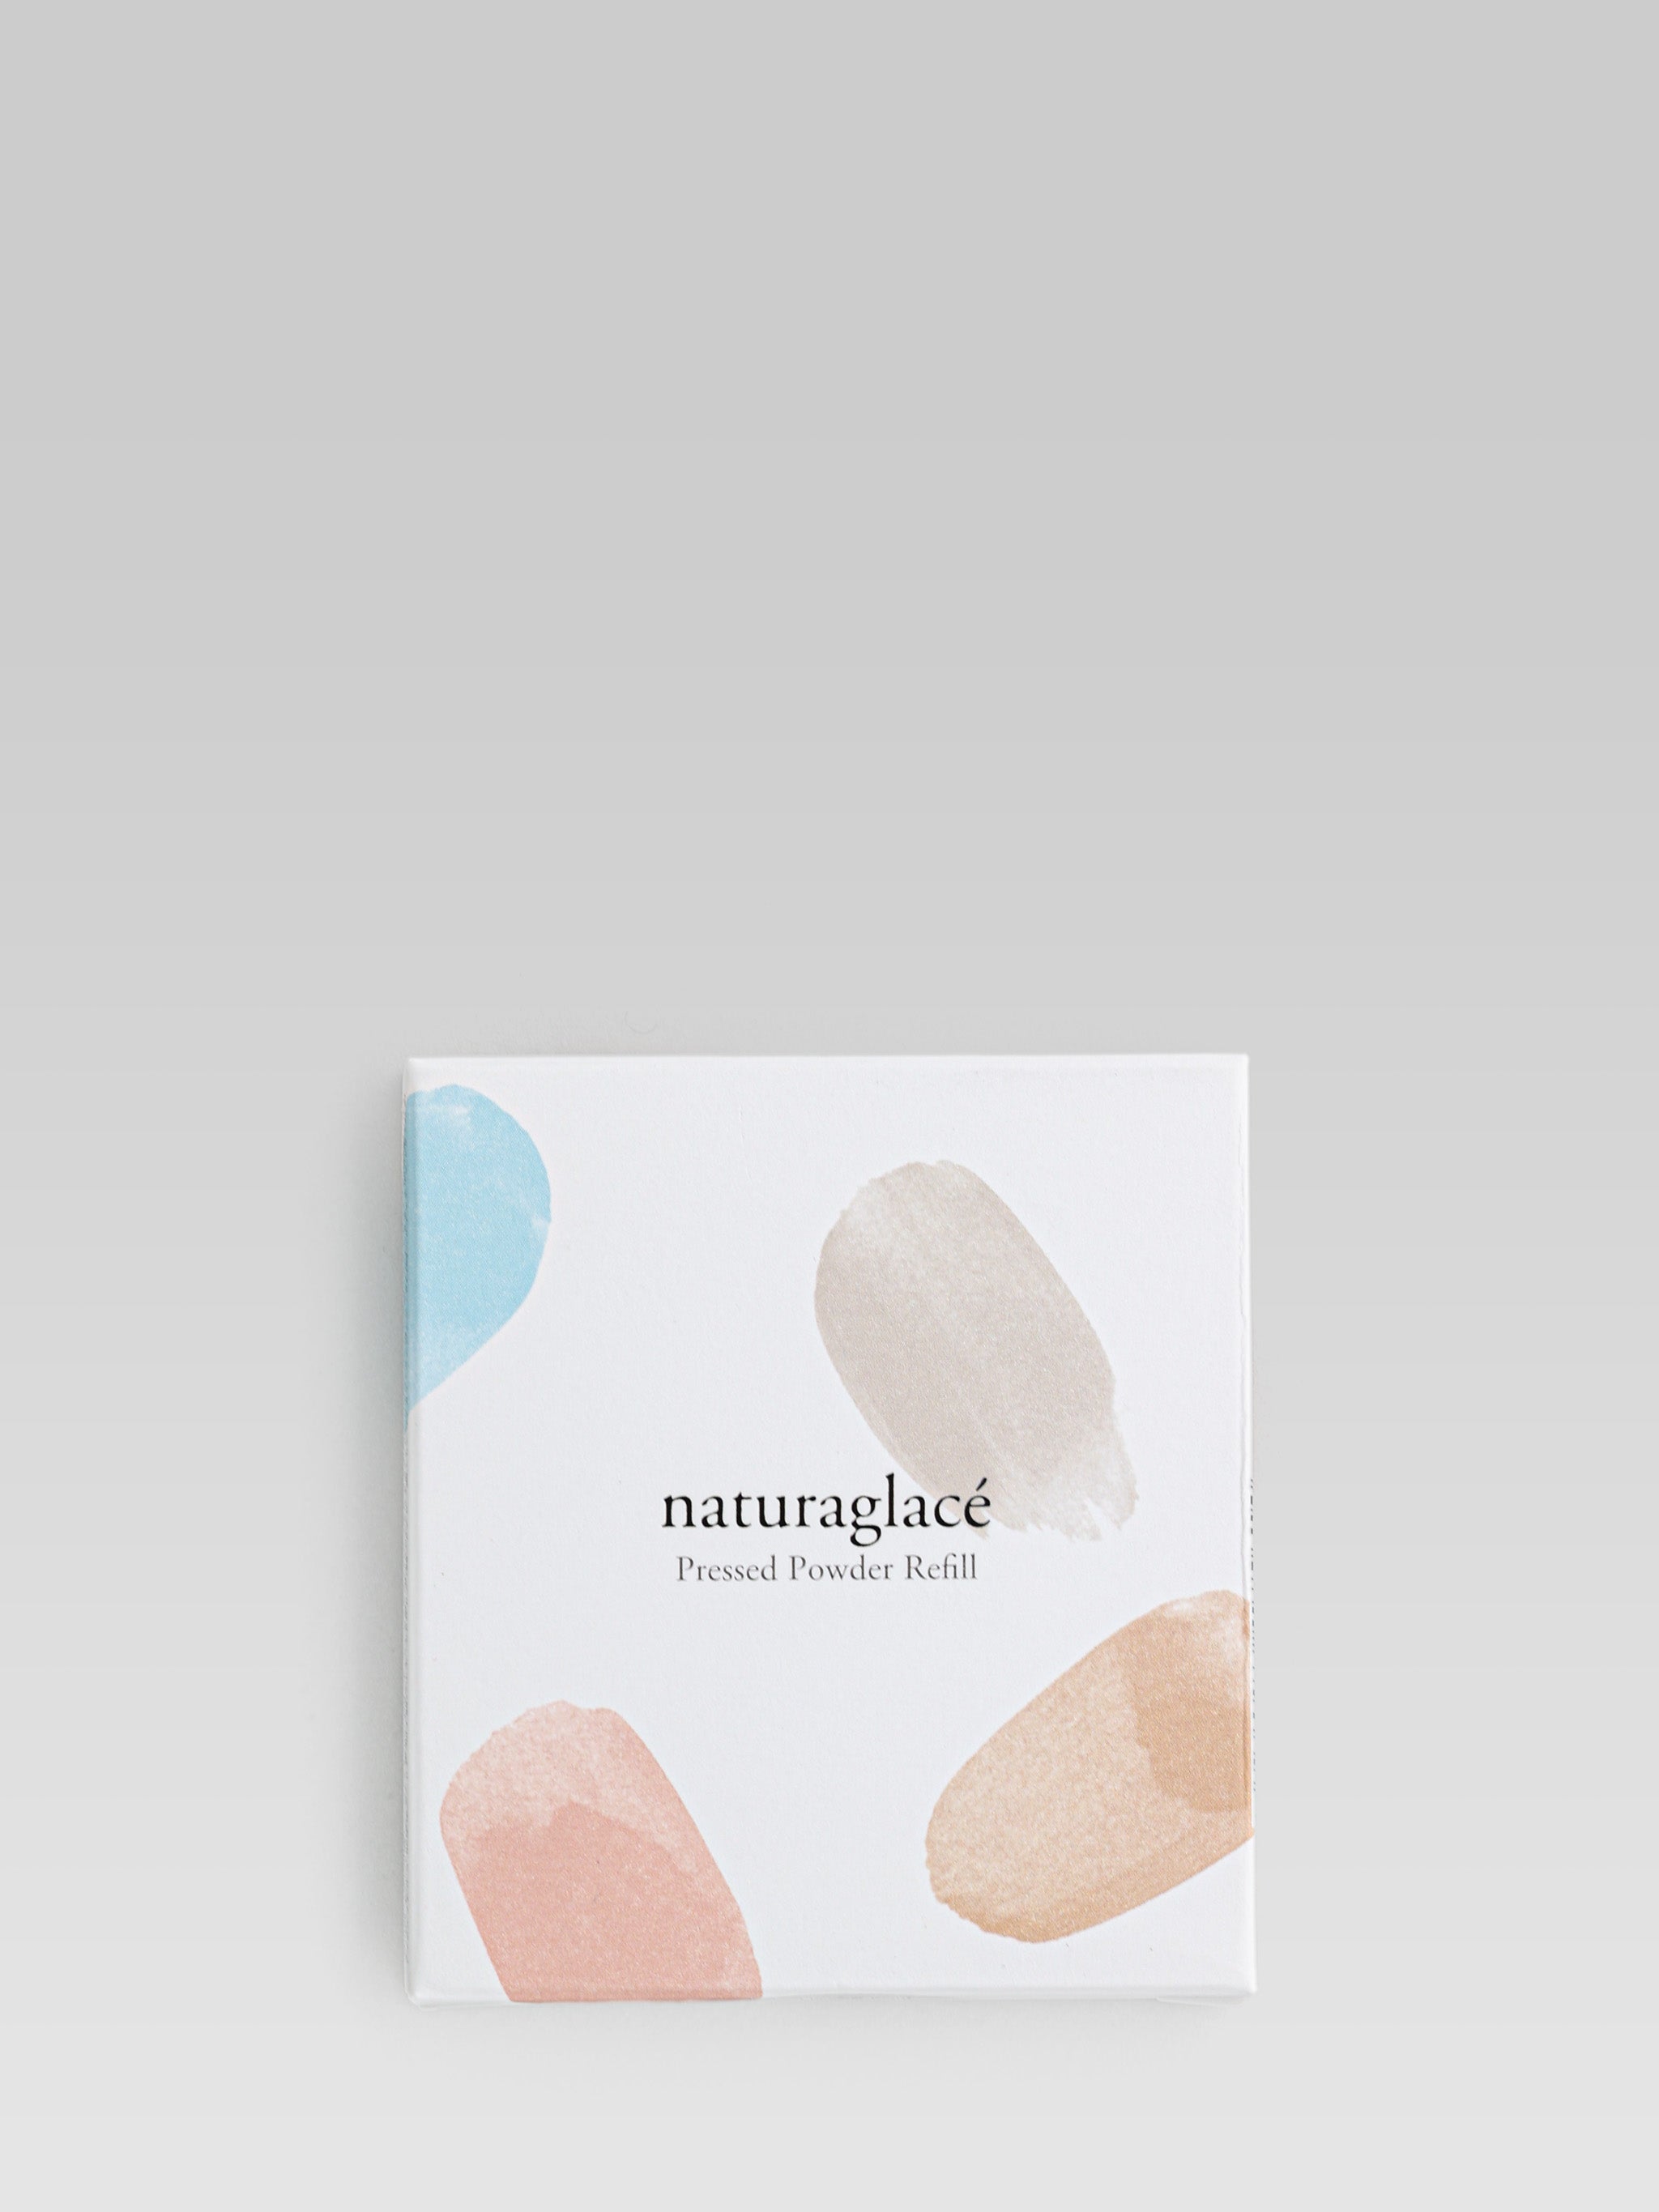 NATURAGLACE Pressed Powder Refill product packaging 